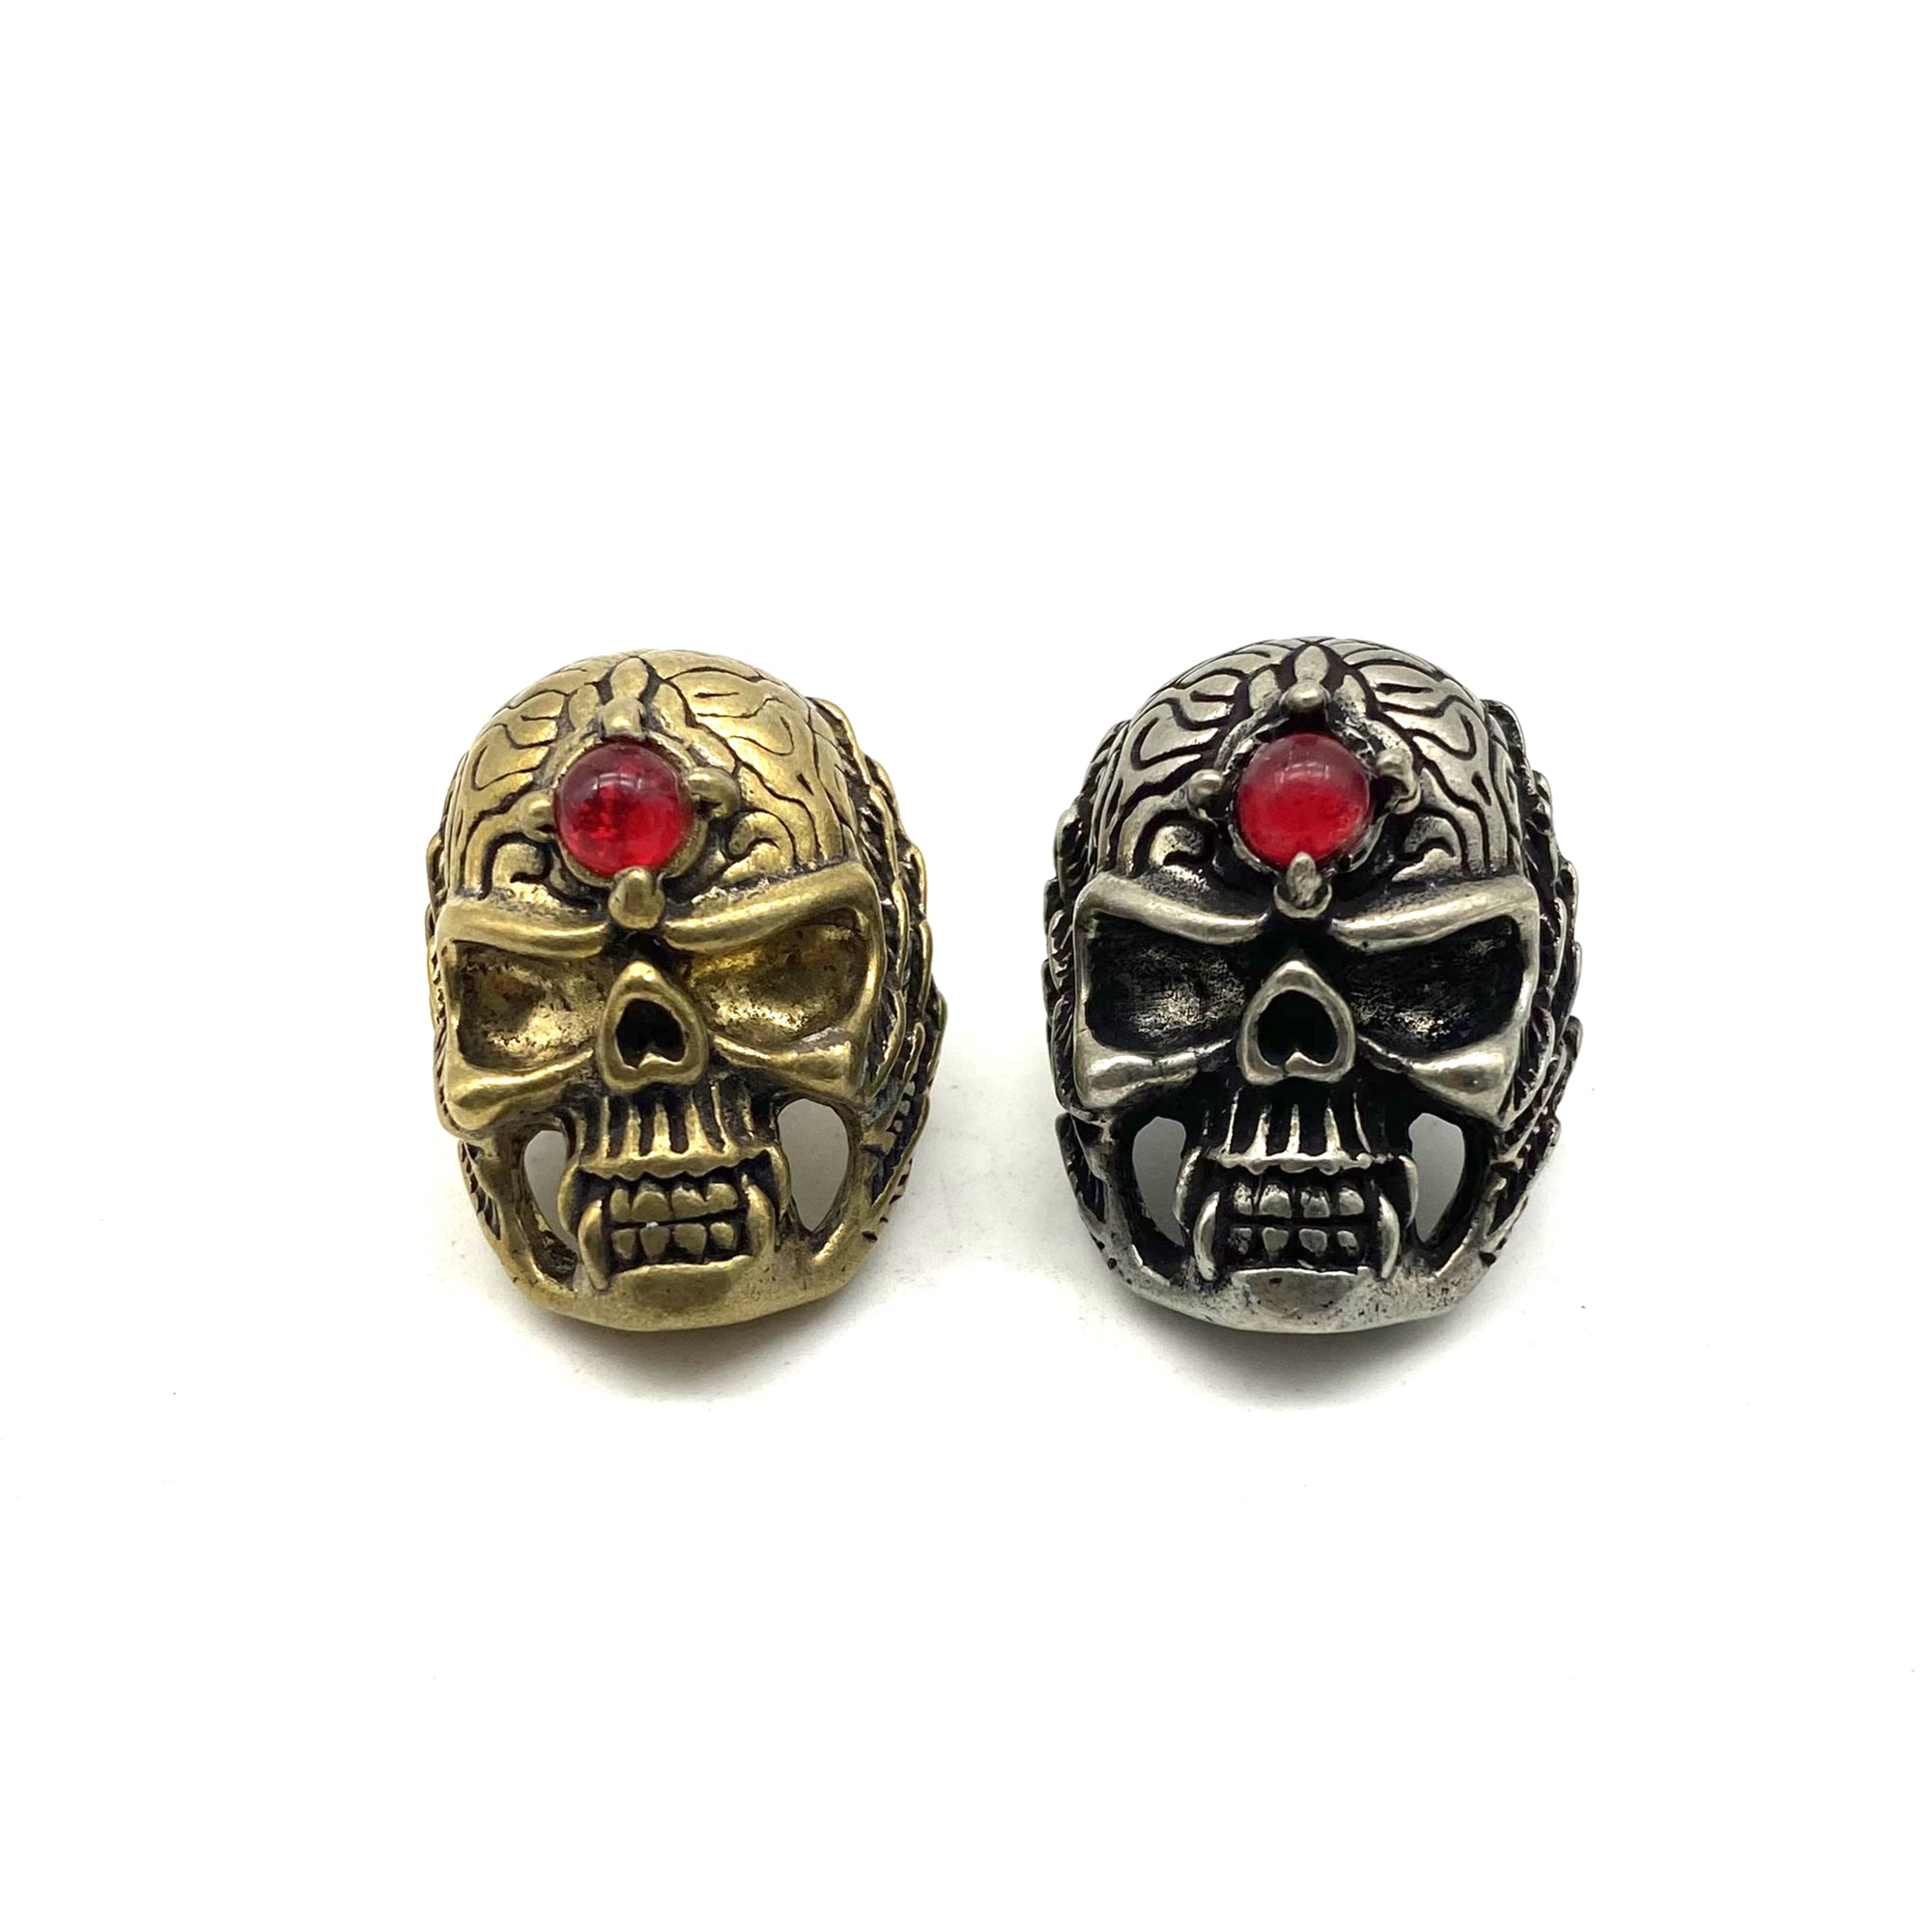 Skull Concho for Leather Goods Decoration,Concho with Red Garnet